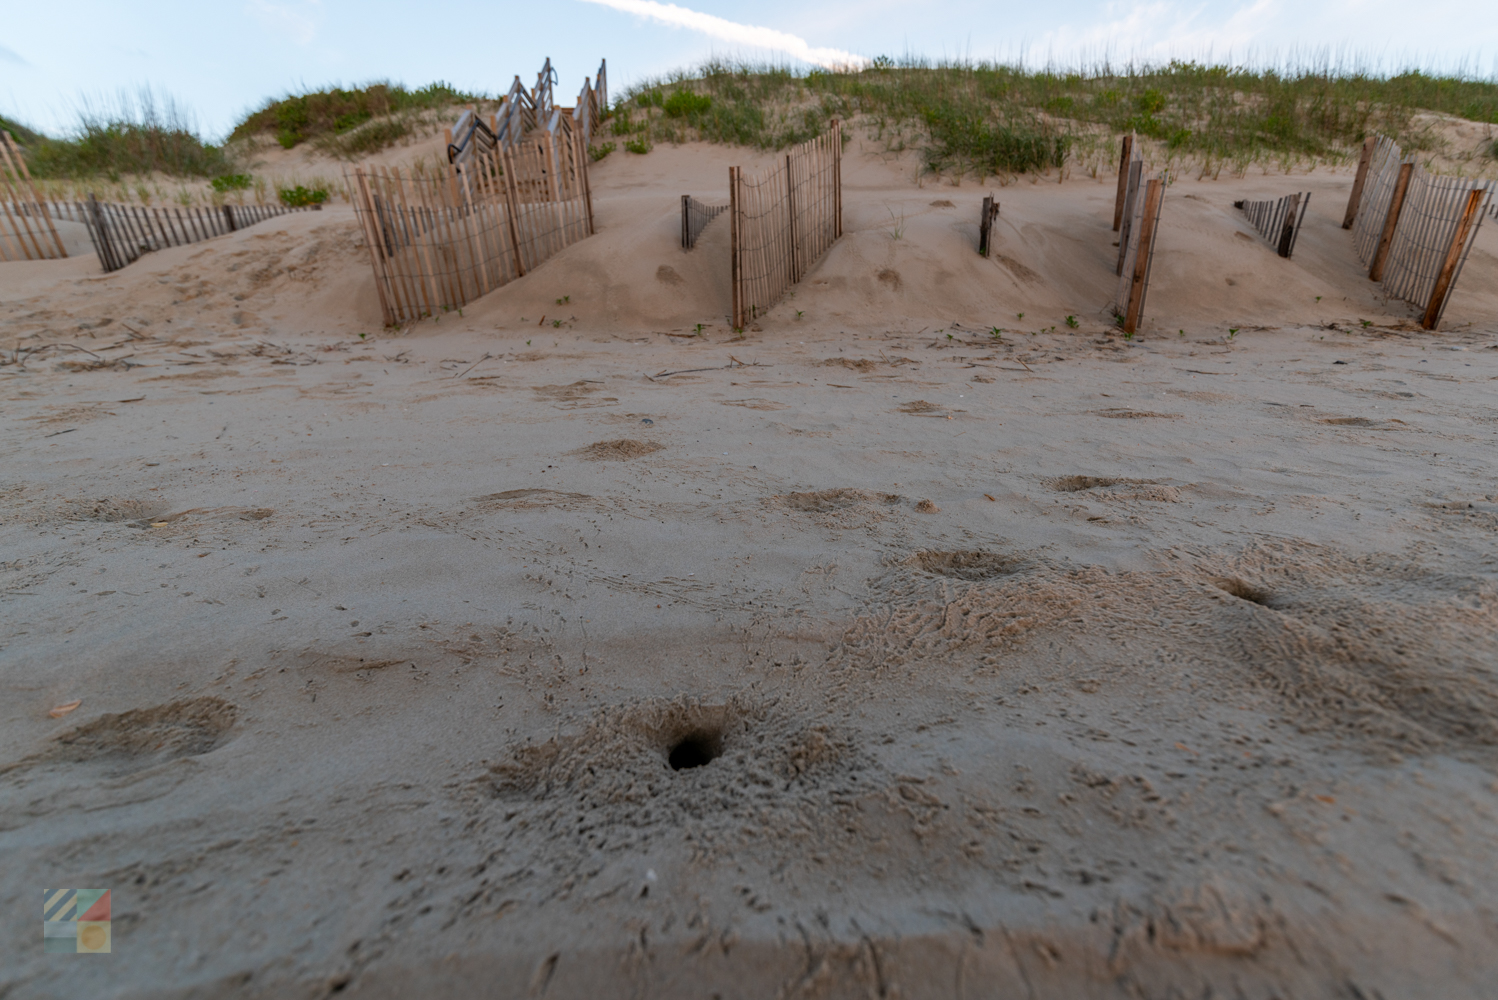 Ghost crab homes on the beach in Corolla NC